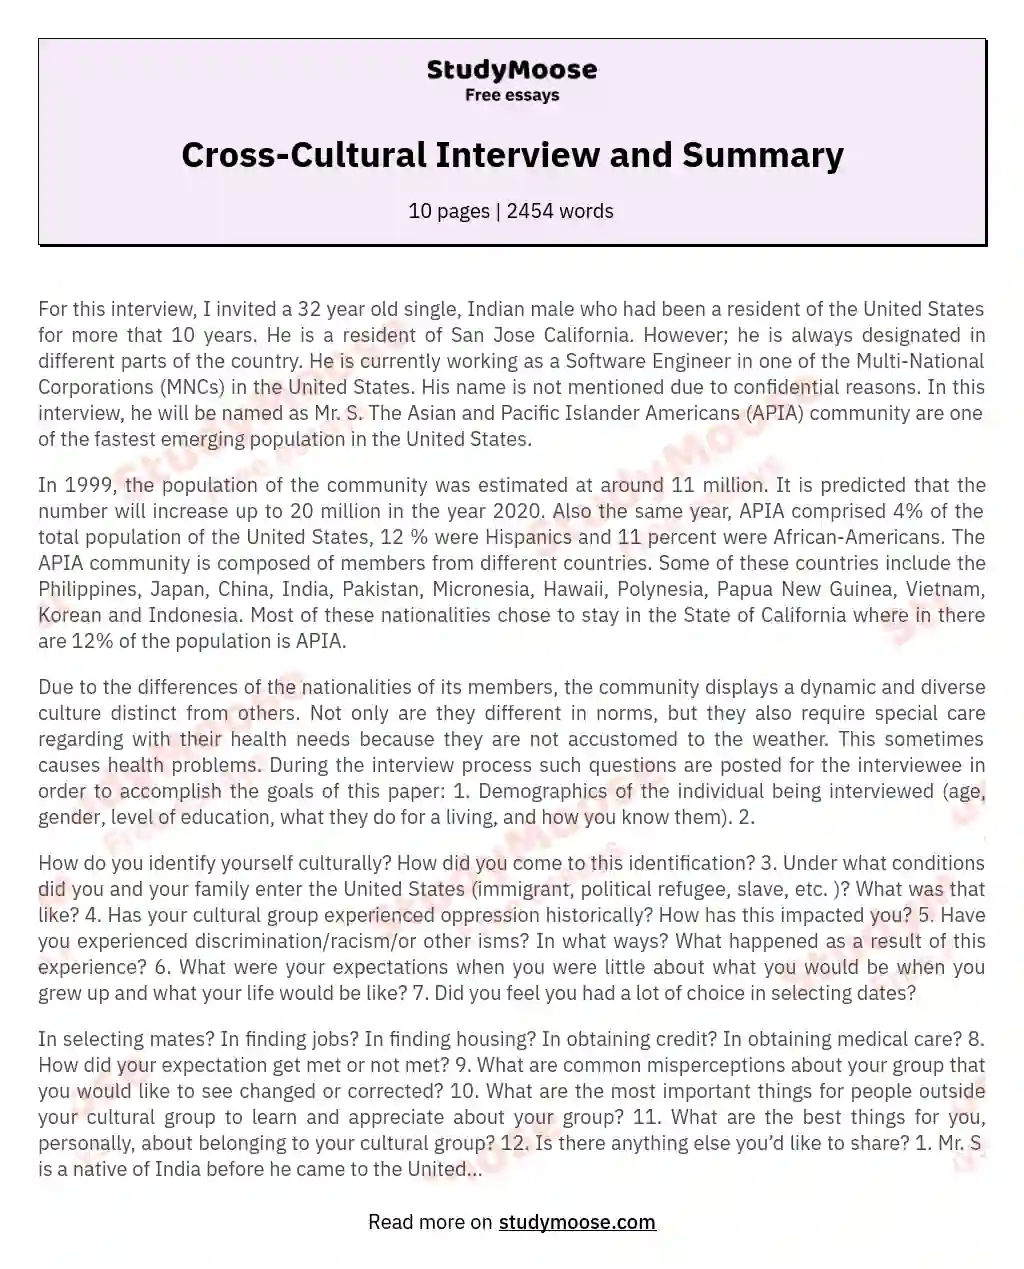 Cross-Cultural Interview and Summary essay